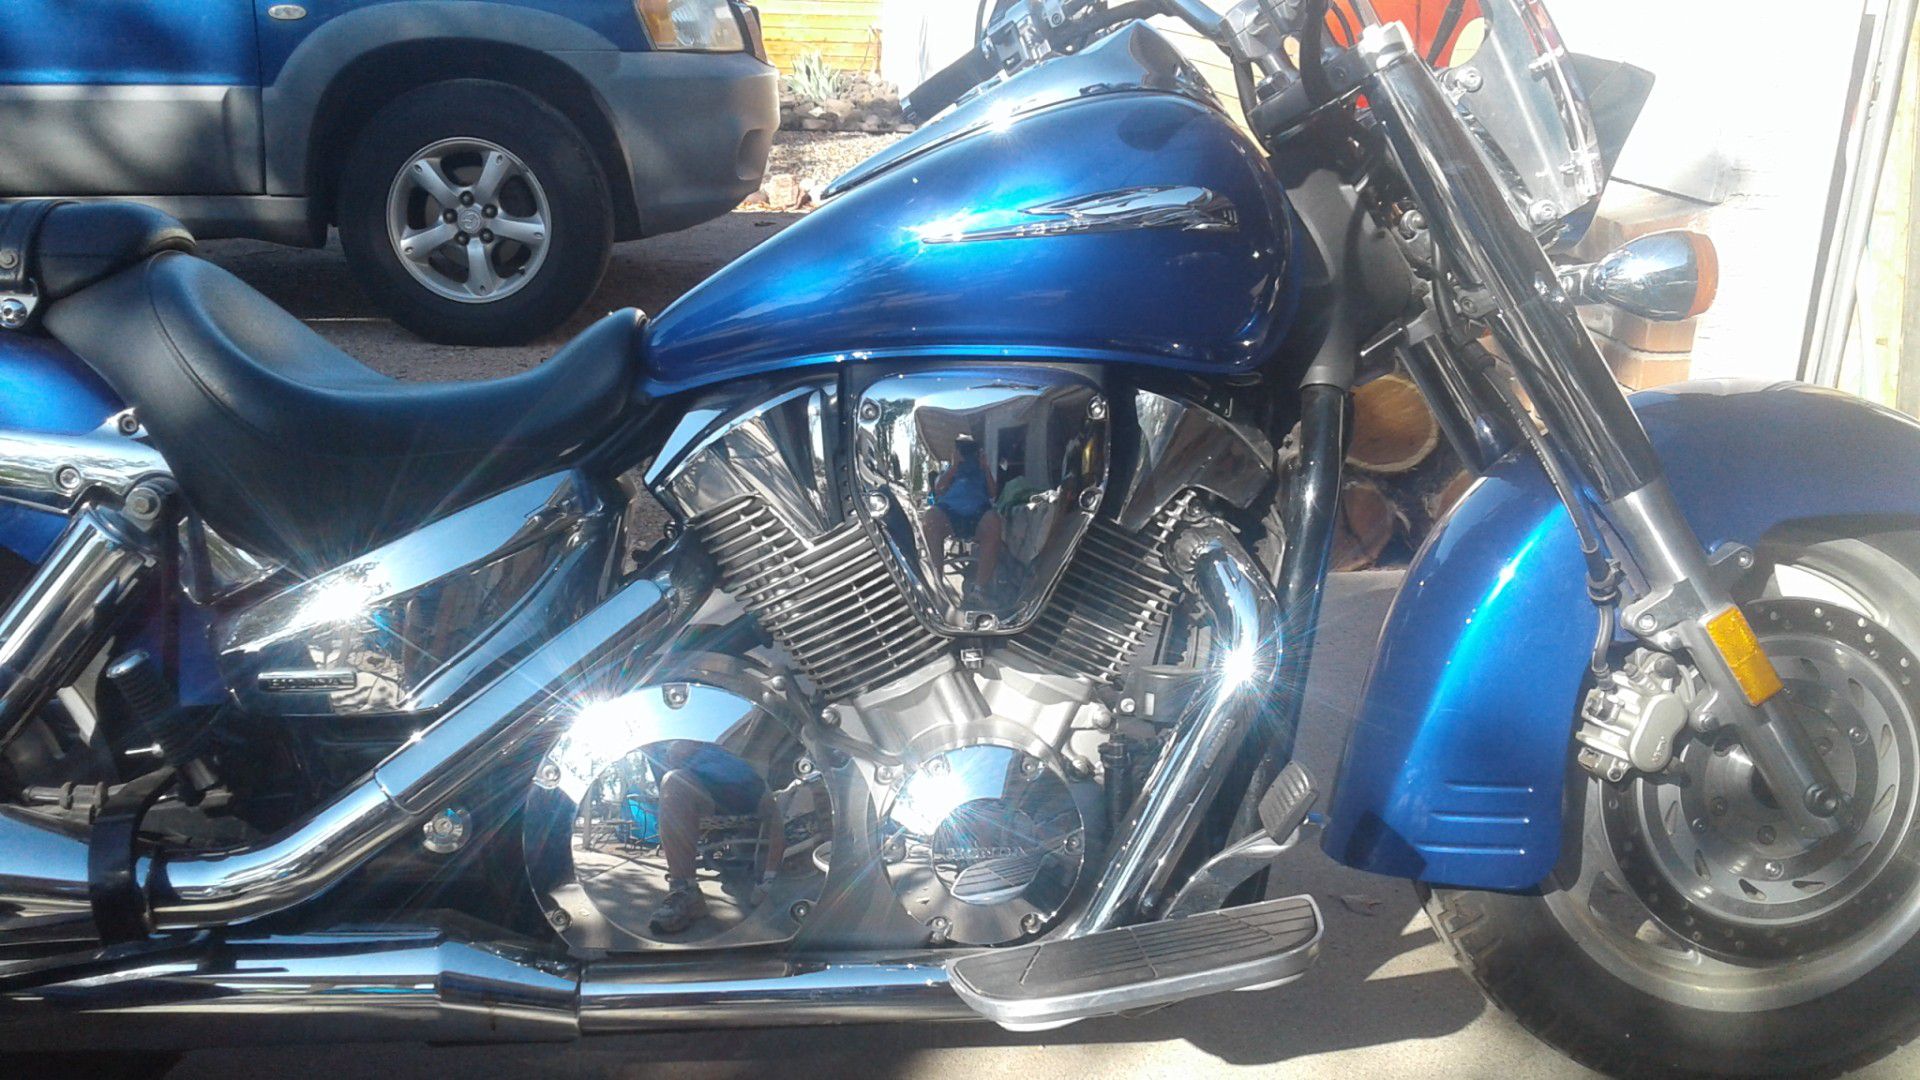 Honda motorcycle VTX 1300 with TRIKE only 2592 miles odometer IN PERFECT PERFECT CONDITION not a scratch